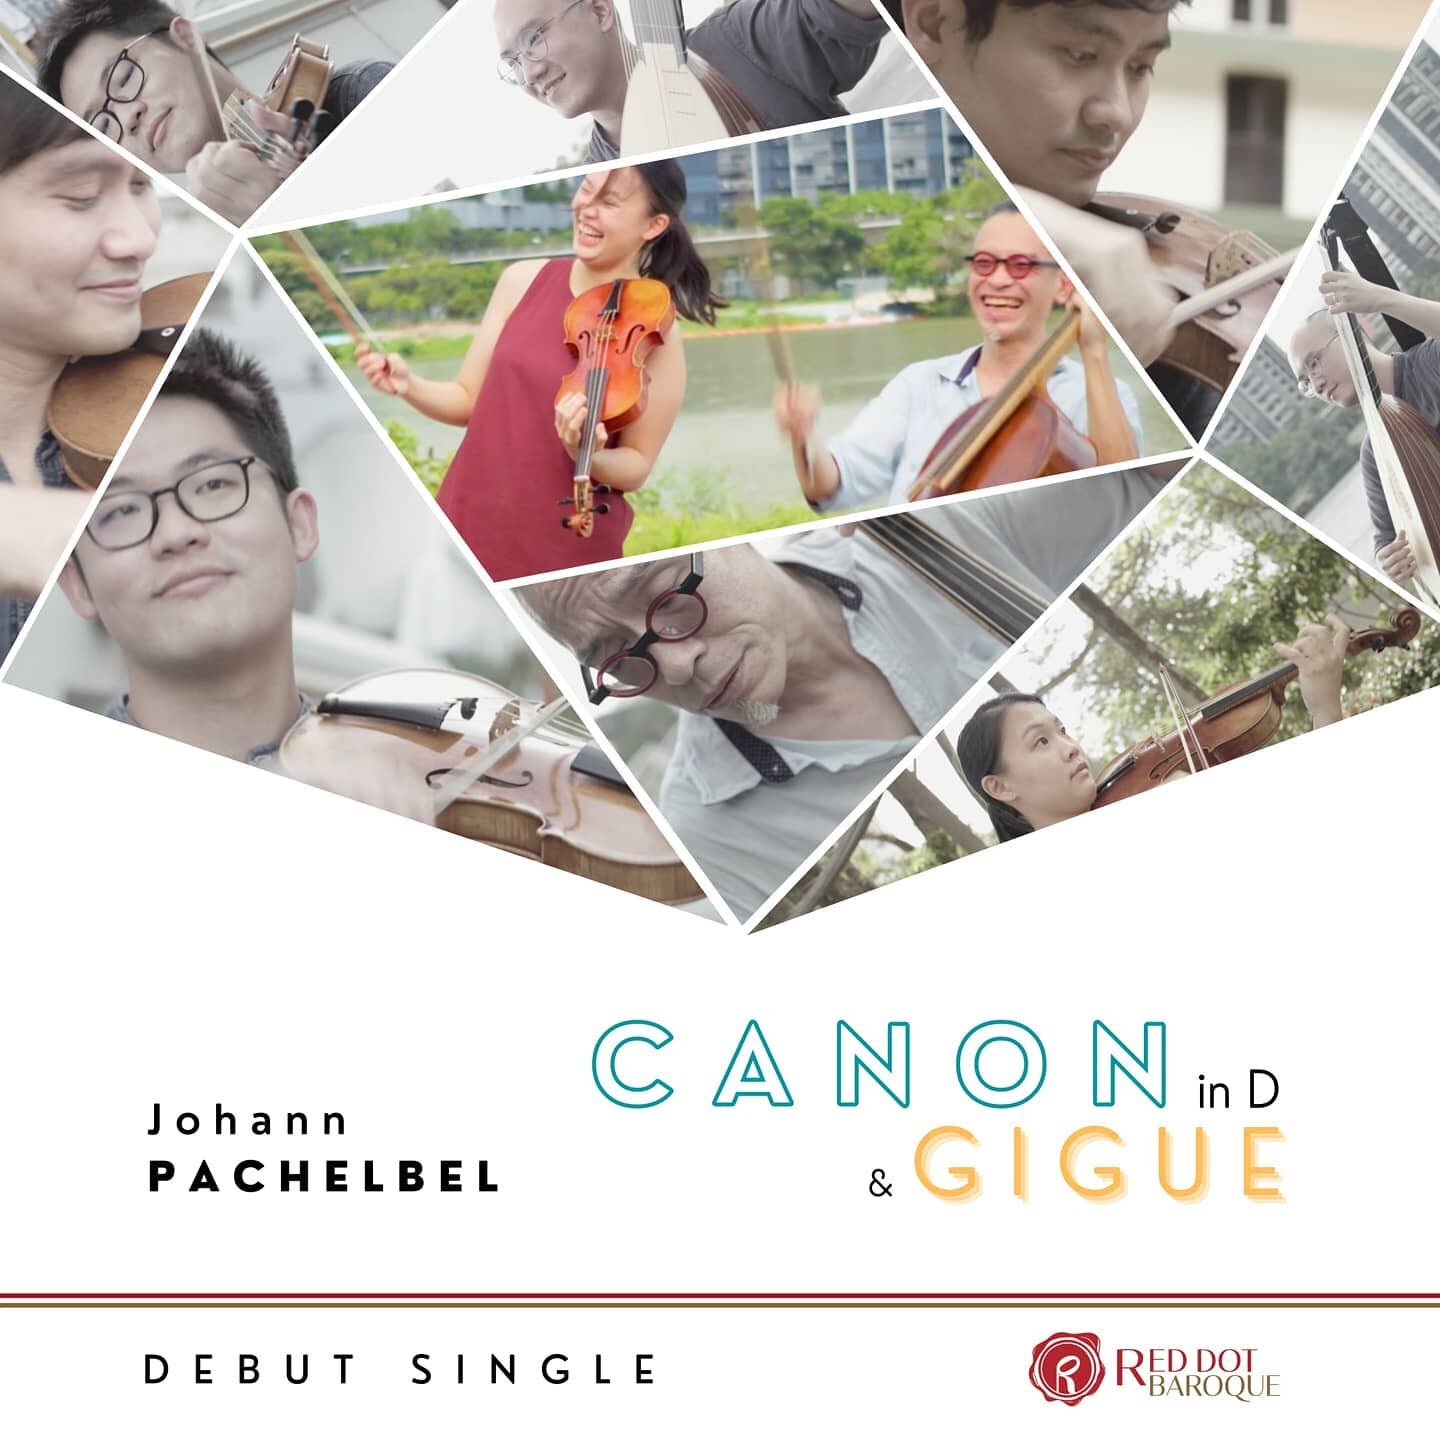 On DEC 19 we present to you the ever-popular Pachelbel's Canon and its lesser-known companion, the Gigue!! Released as a special music video filmed in the heartlands of Singapore, our fresh take on this classic on our baroque instruments might very w